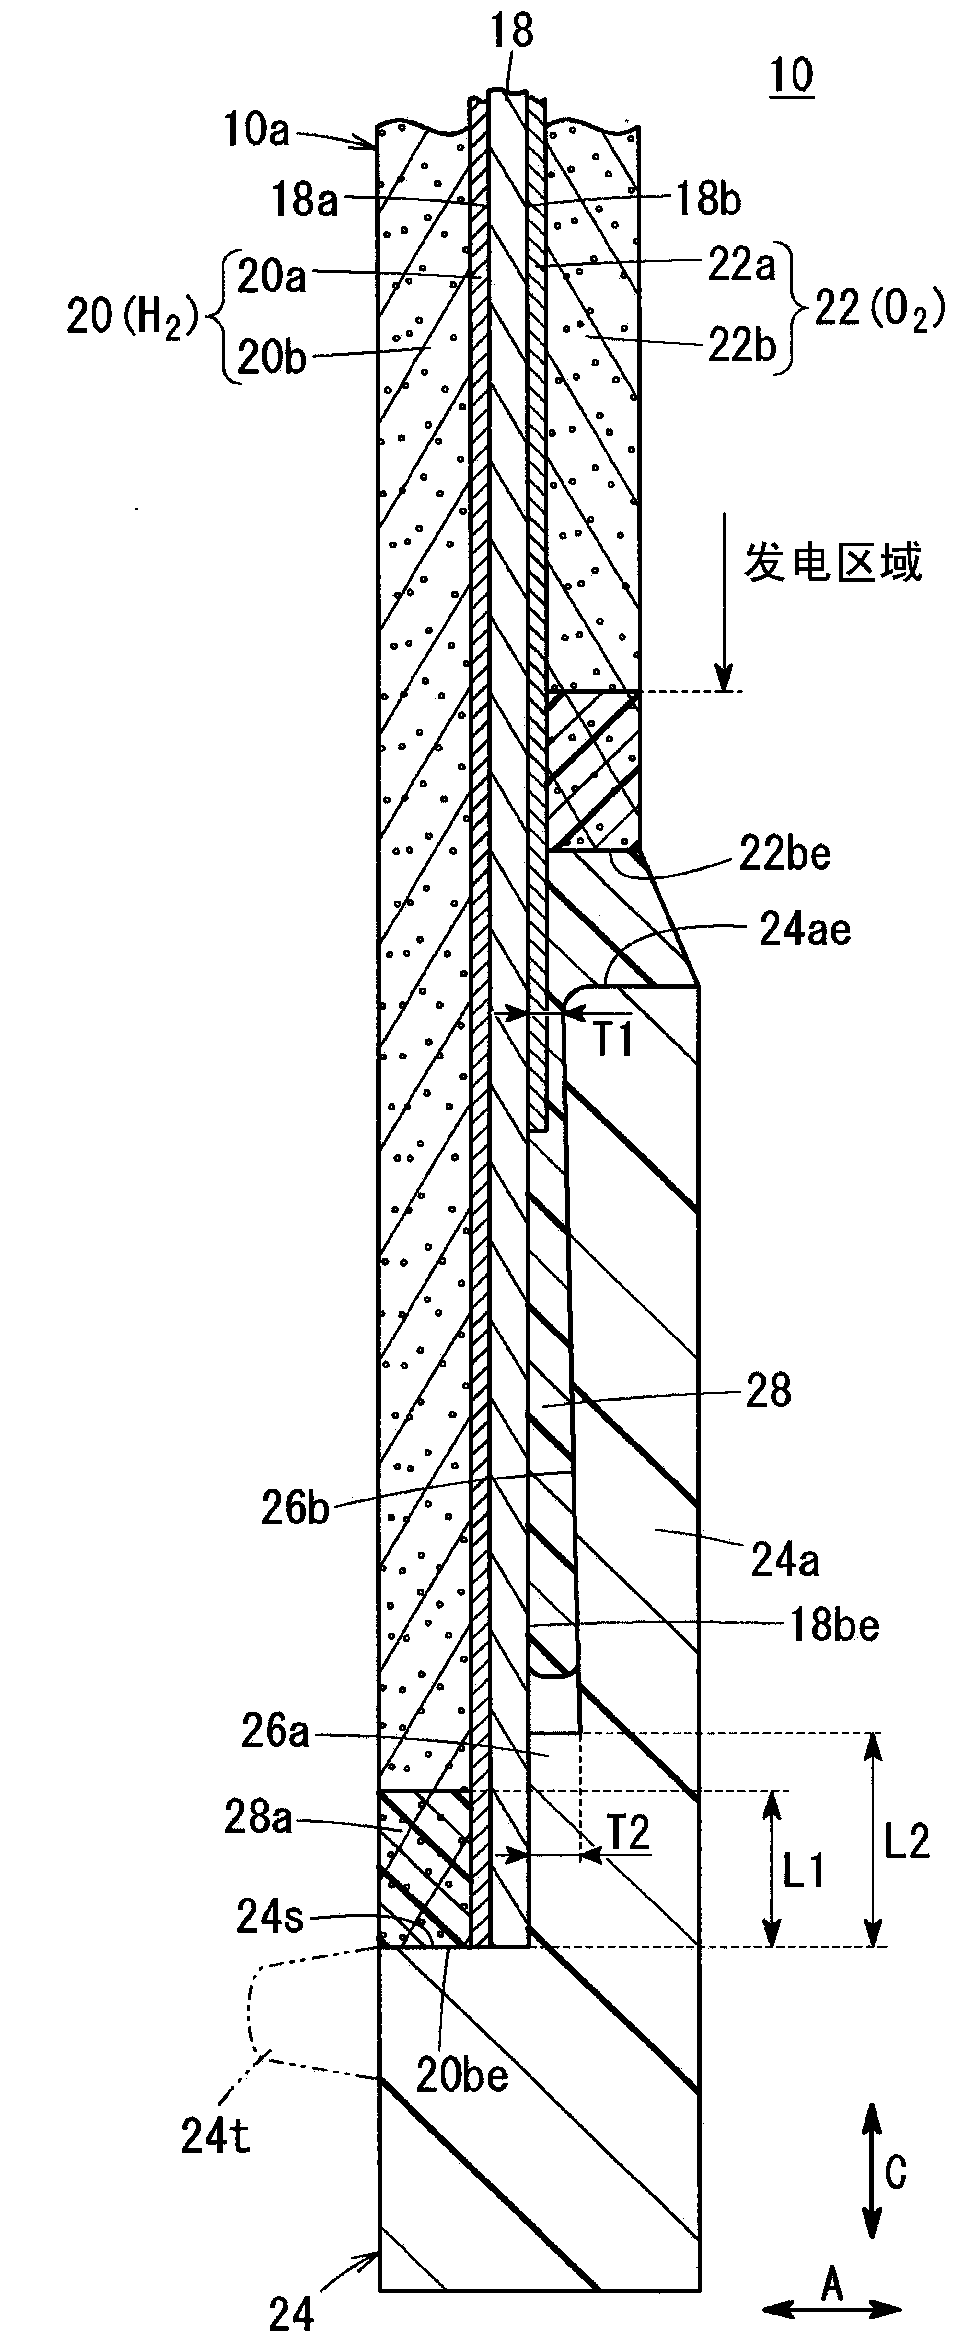 Electrolyte membrane-electrode structure with resin frame for fuel cells